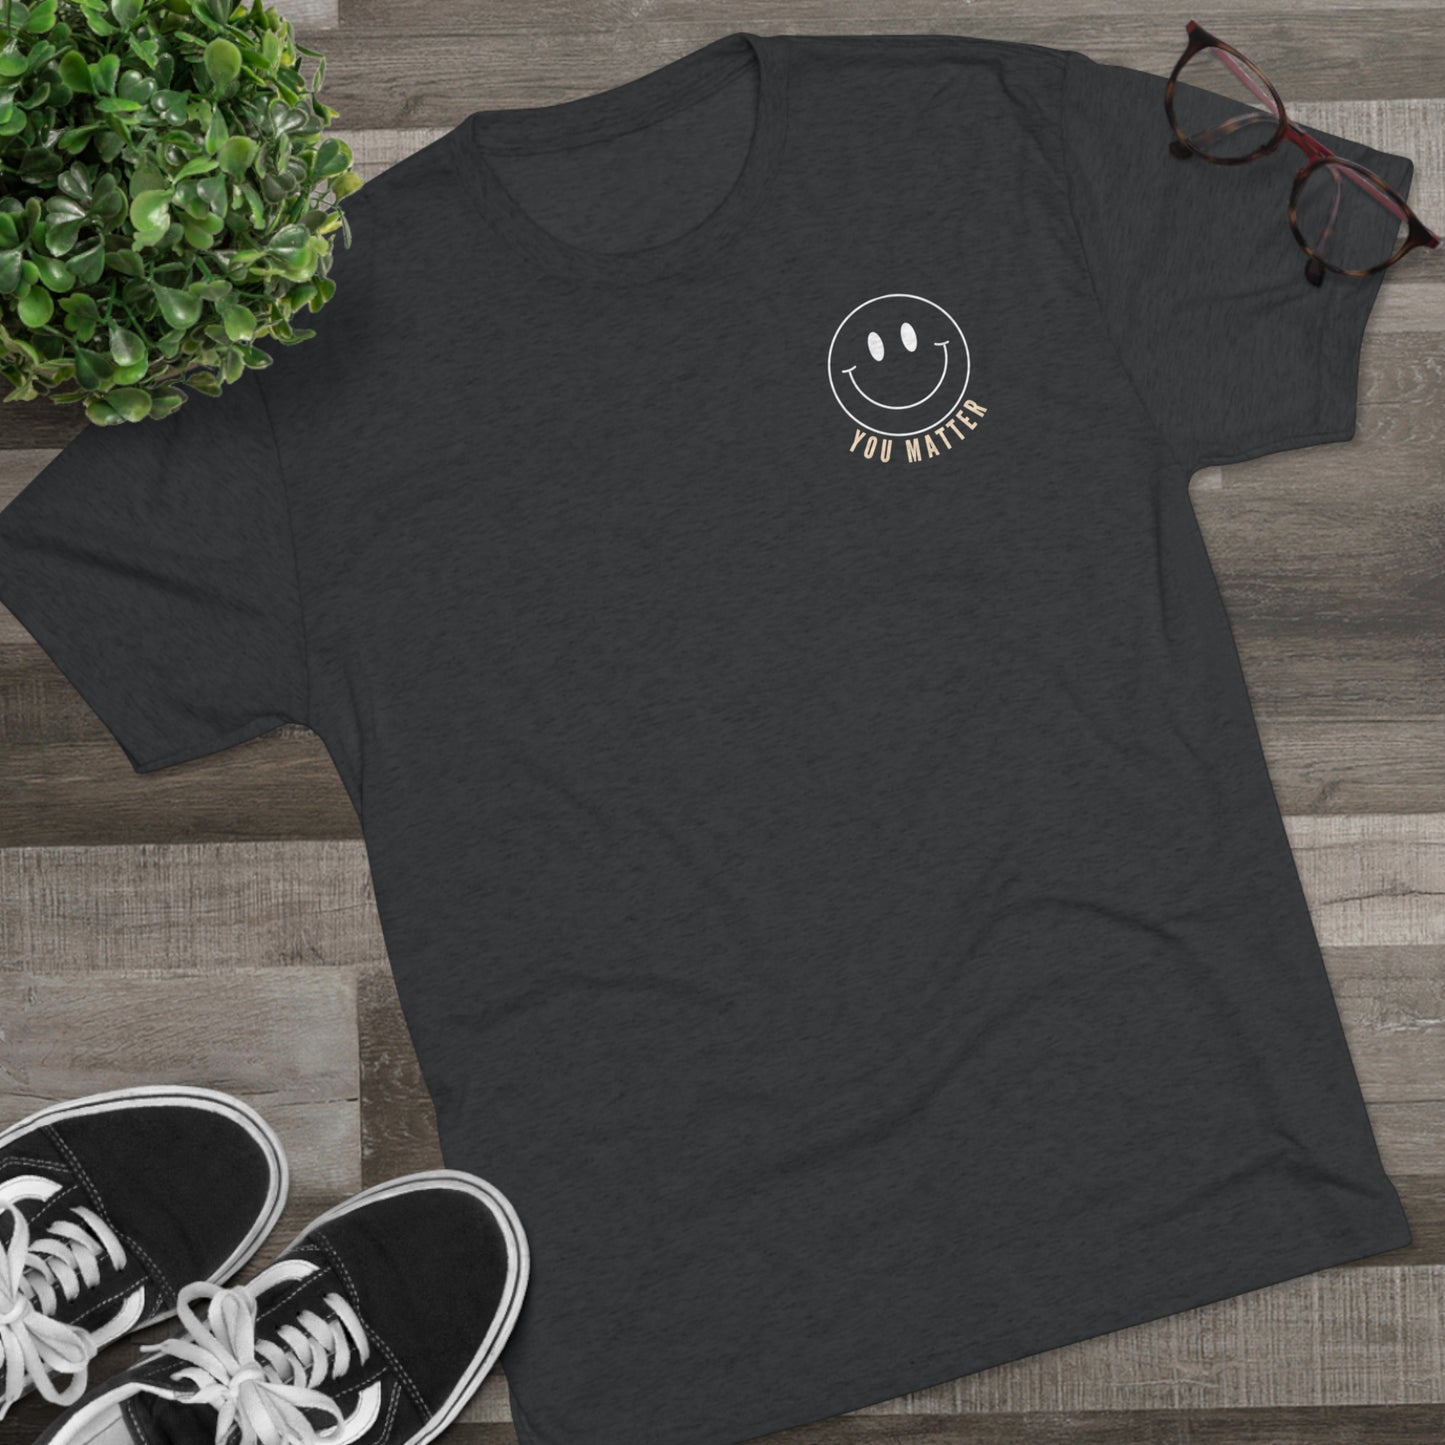 To the Person Behind Me, YOU MATTER -  Tri-Blend Crew Tee